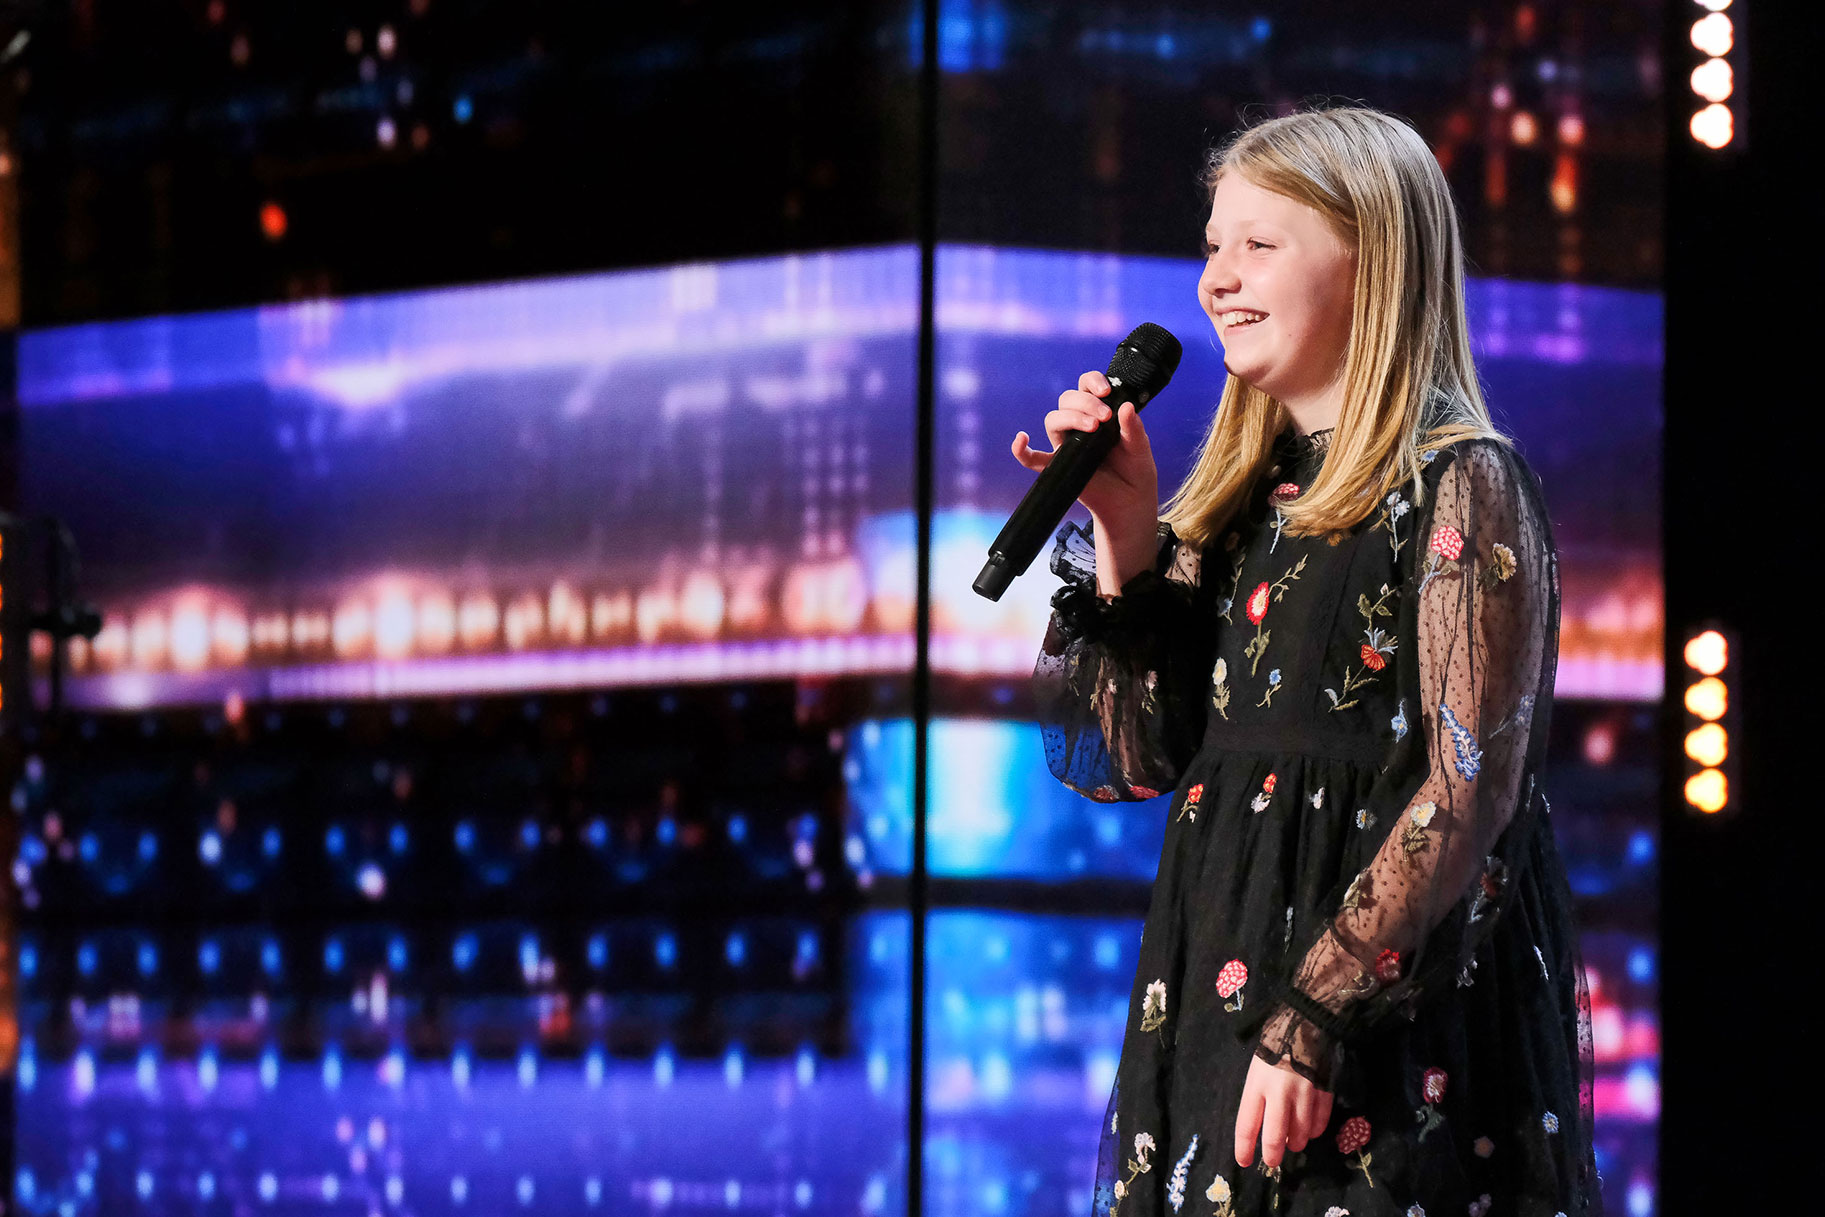 Harper performing on the Americas Got Talent stage